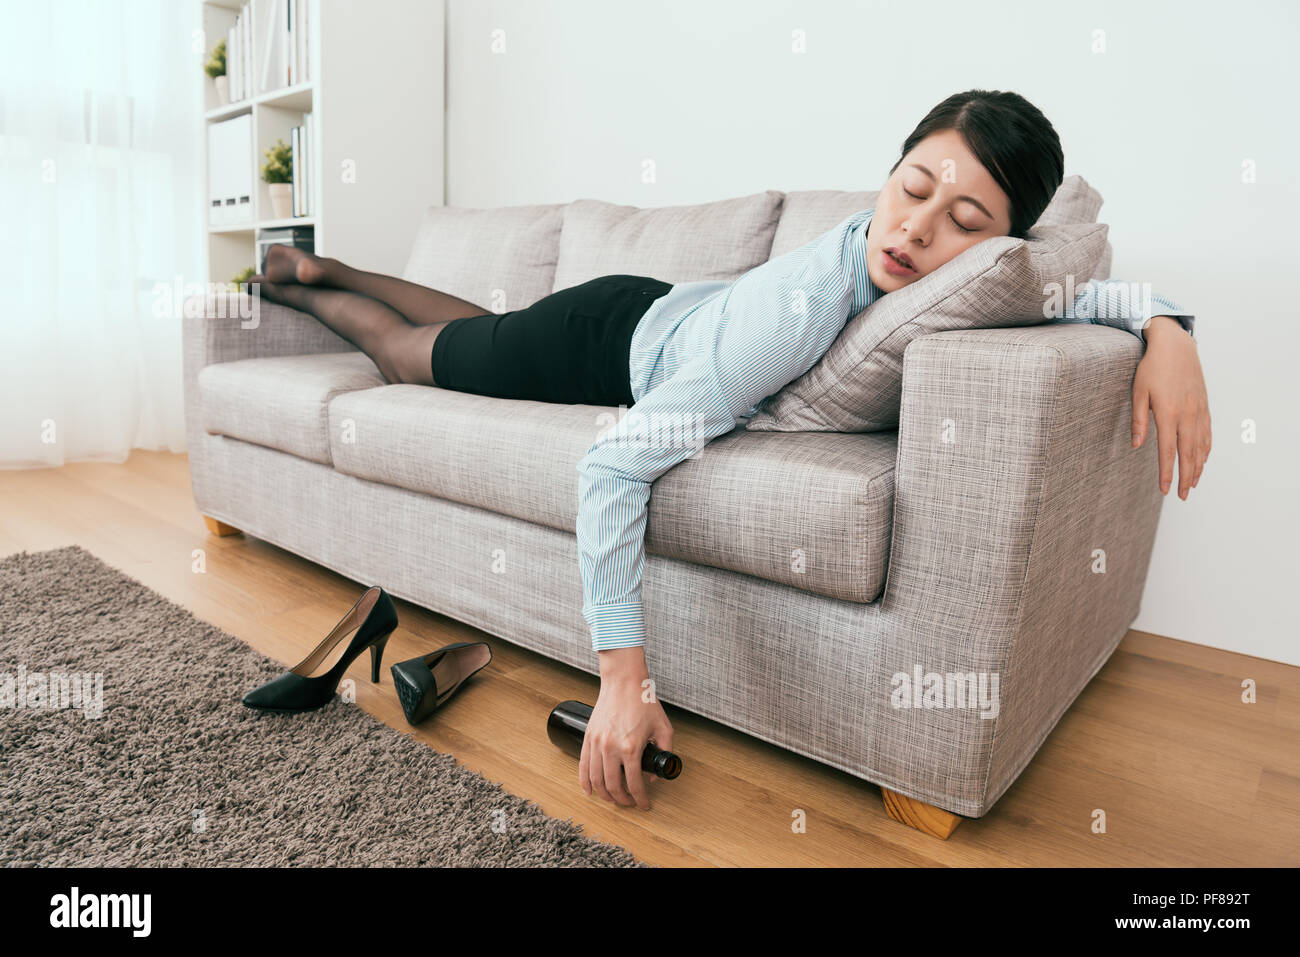 she is drunk and fell asleep on the sofa in the living room at home Stock Photo